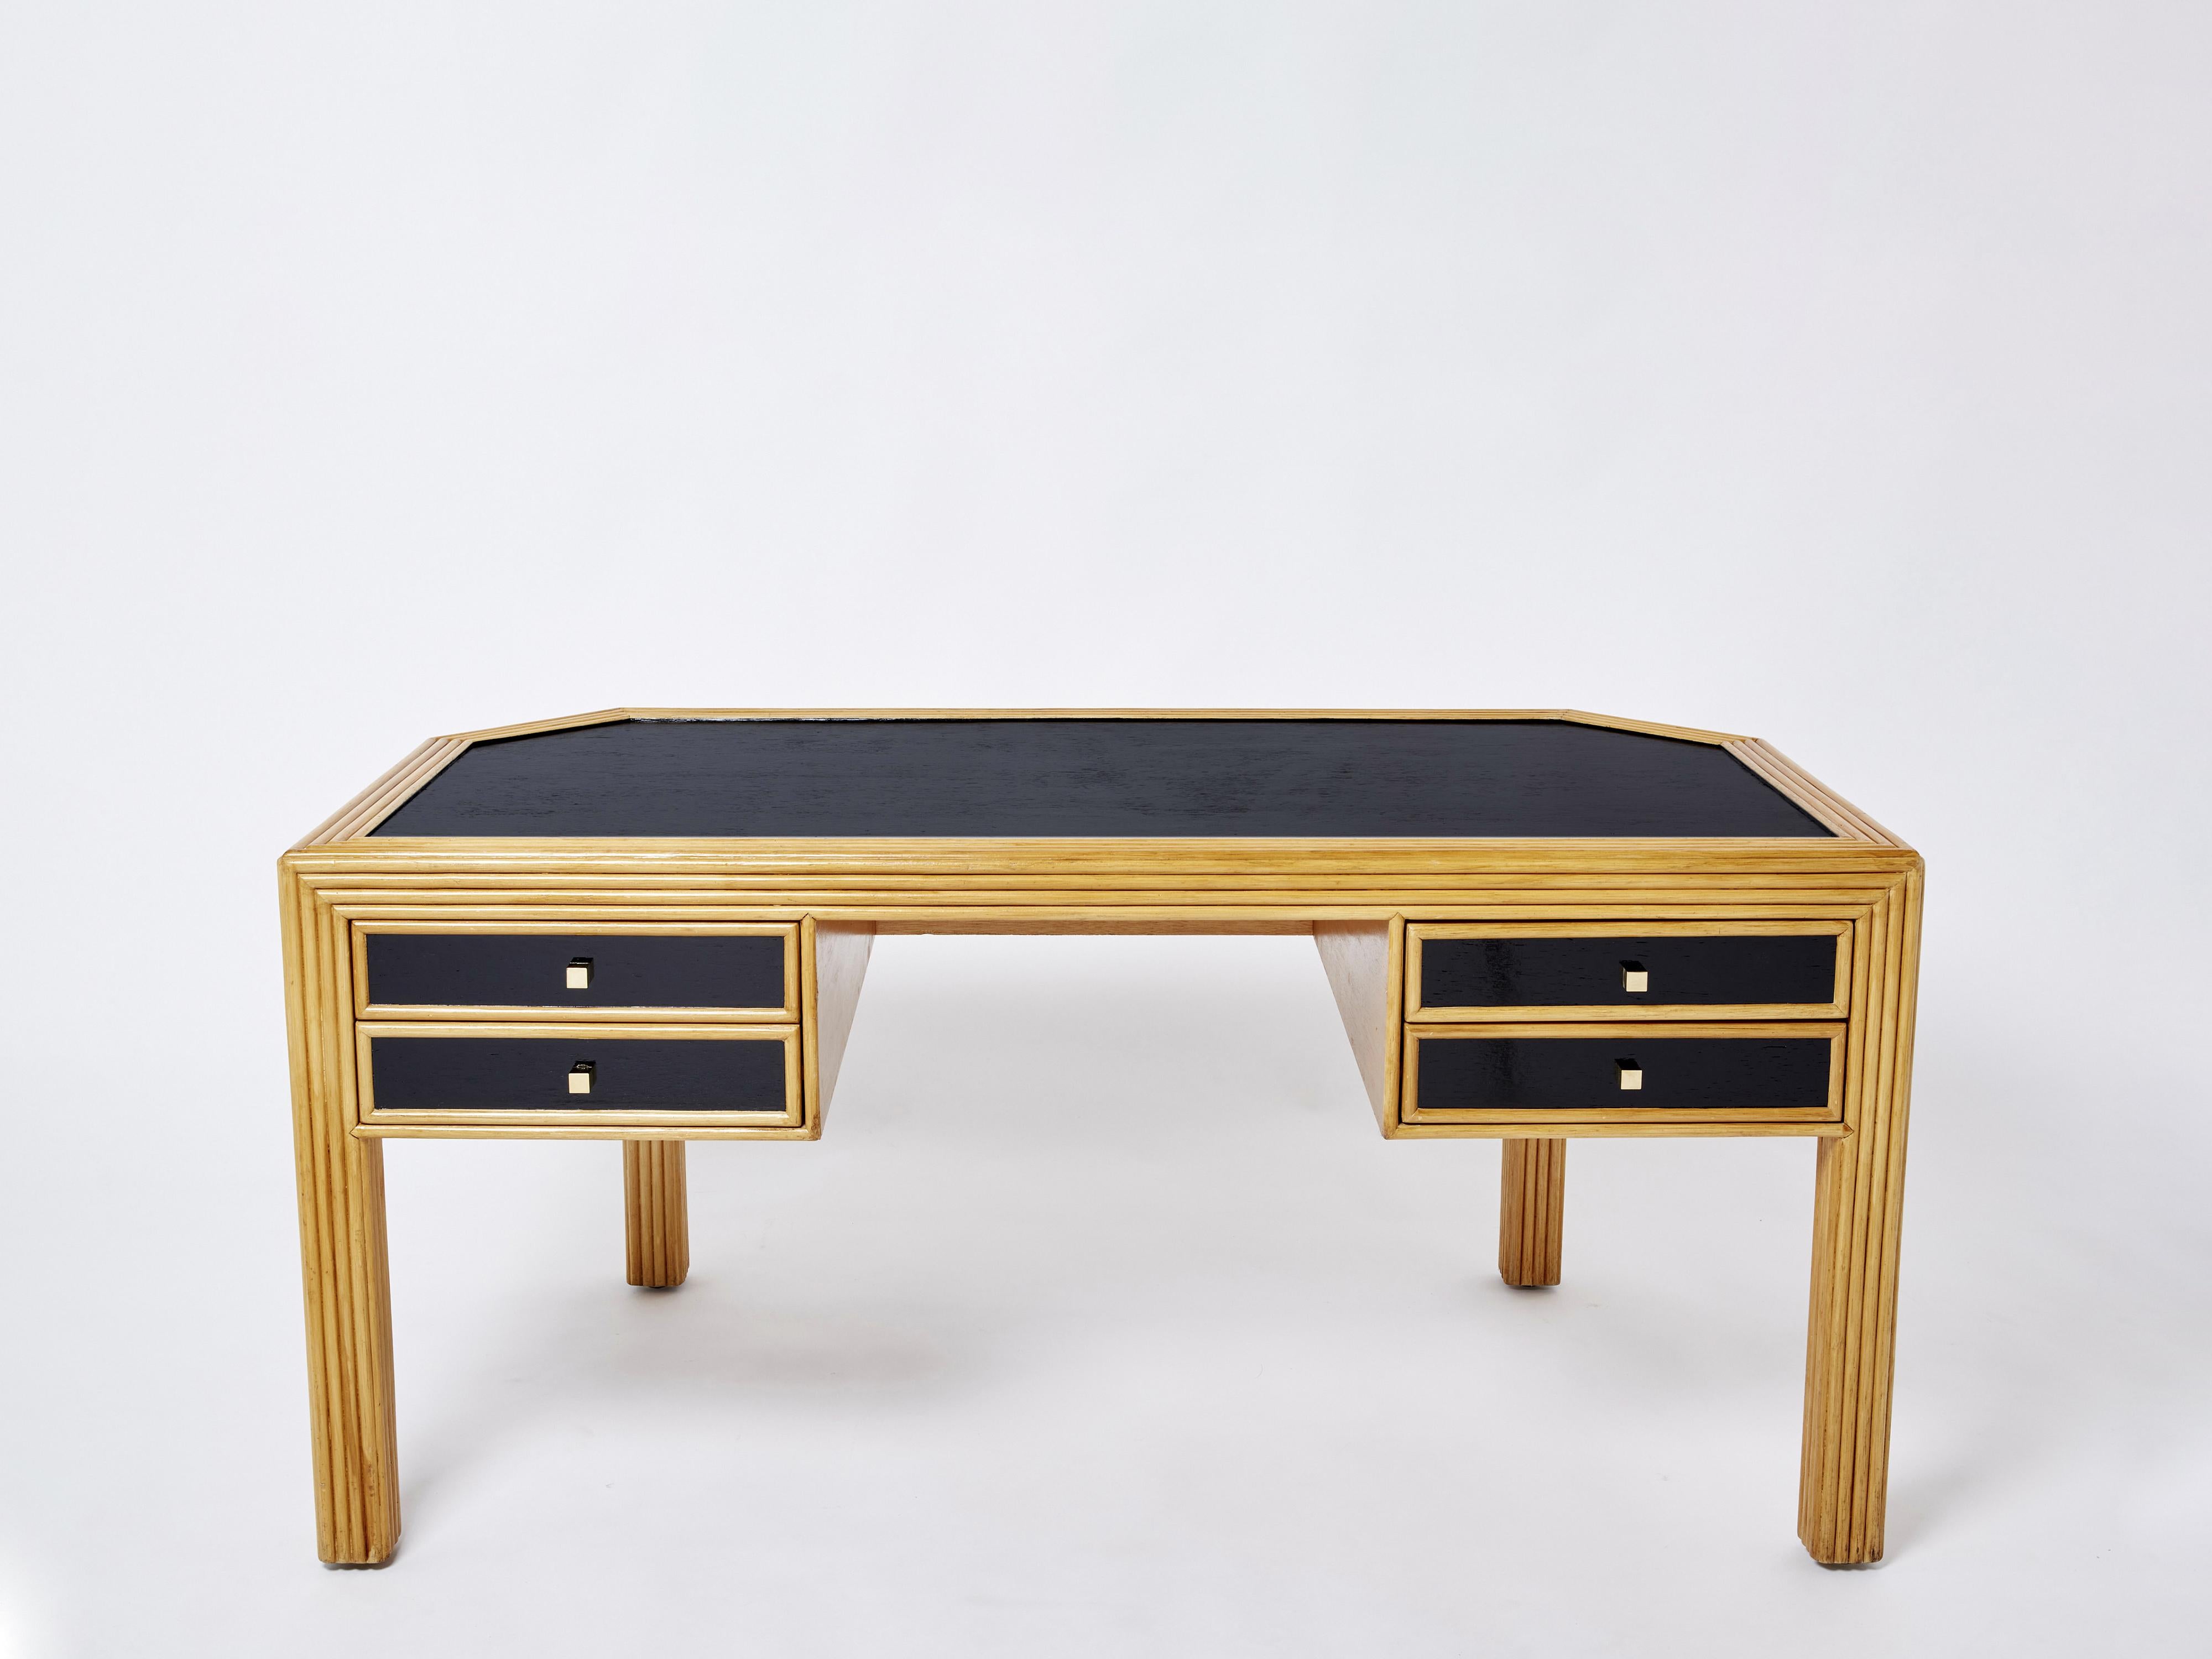 This is a beautiful Italian rattan executive desk from the 1970s. The mix of rattan, black painted wood all around, and brass handles, is inspired by mid-century Italian icon Gabriella Crespi and the French Riviera trend from the 1960s and 1970s.